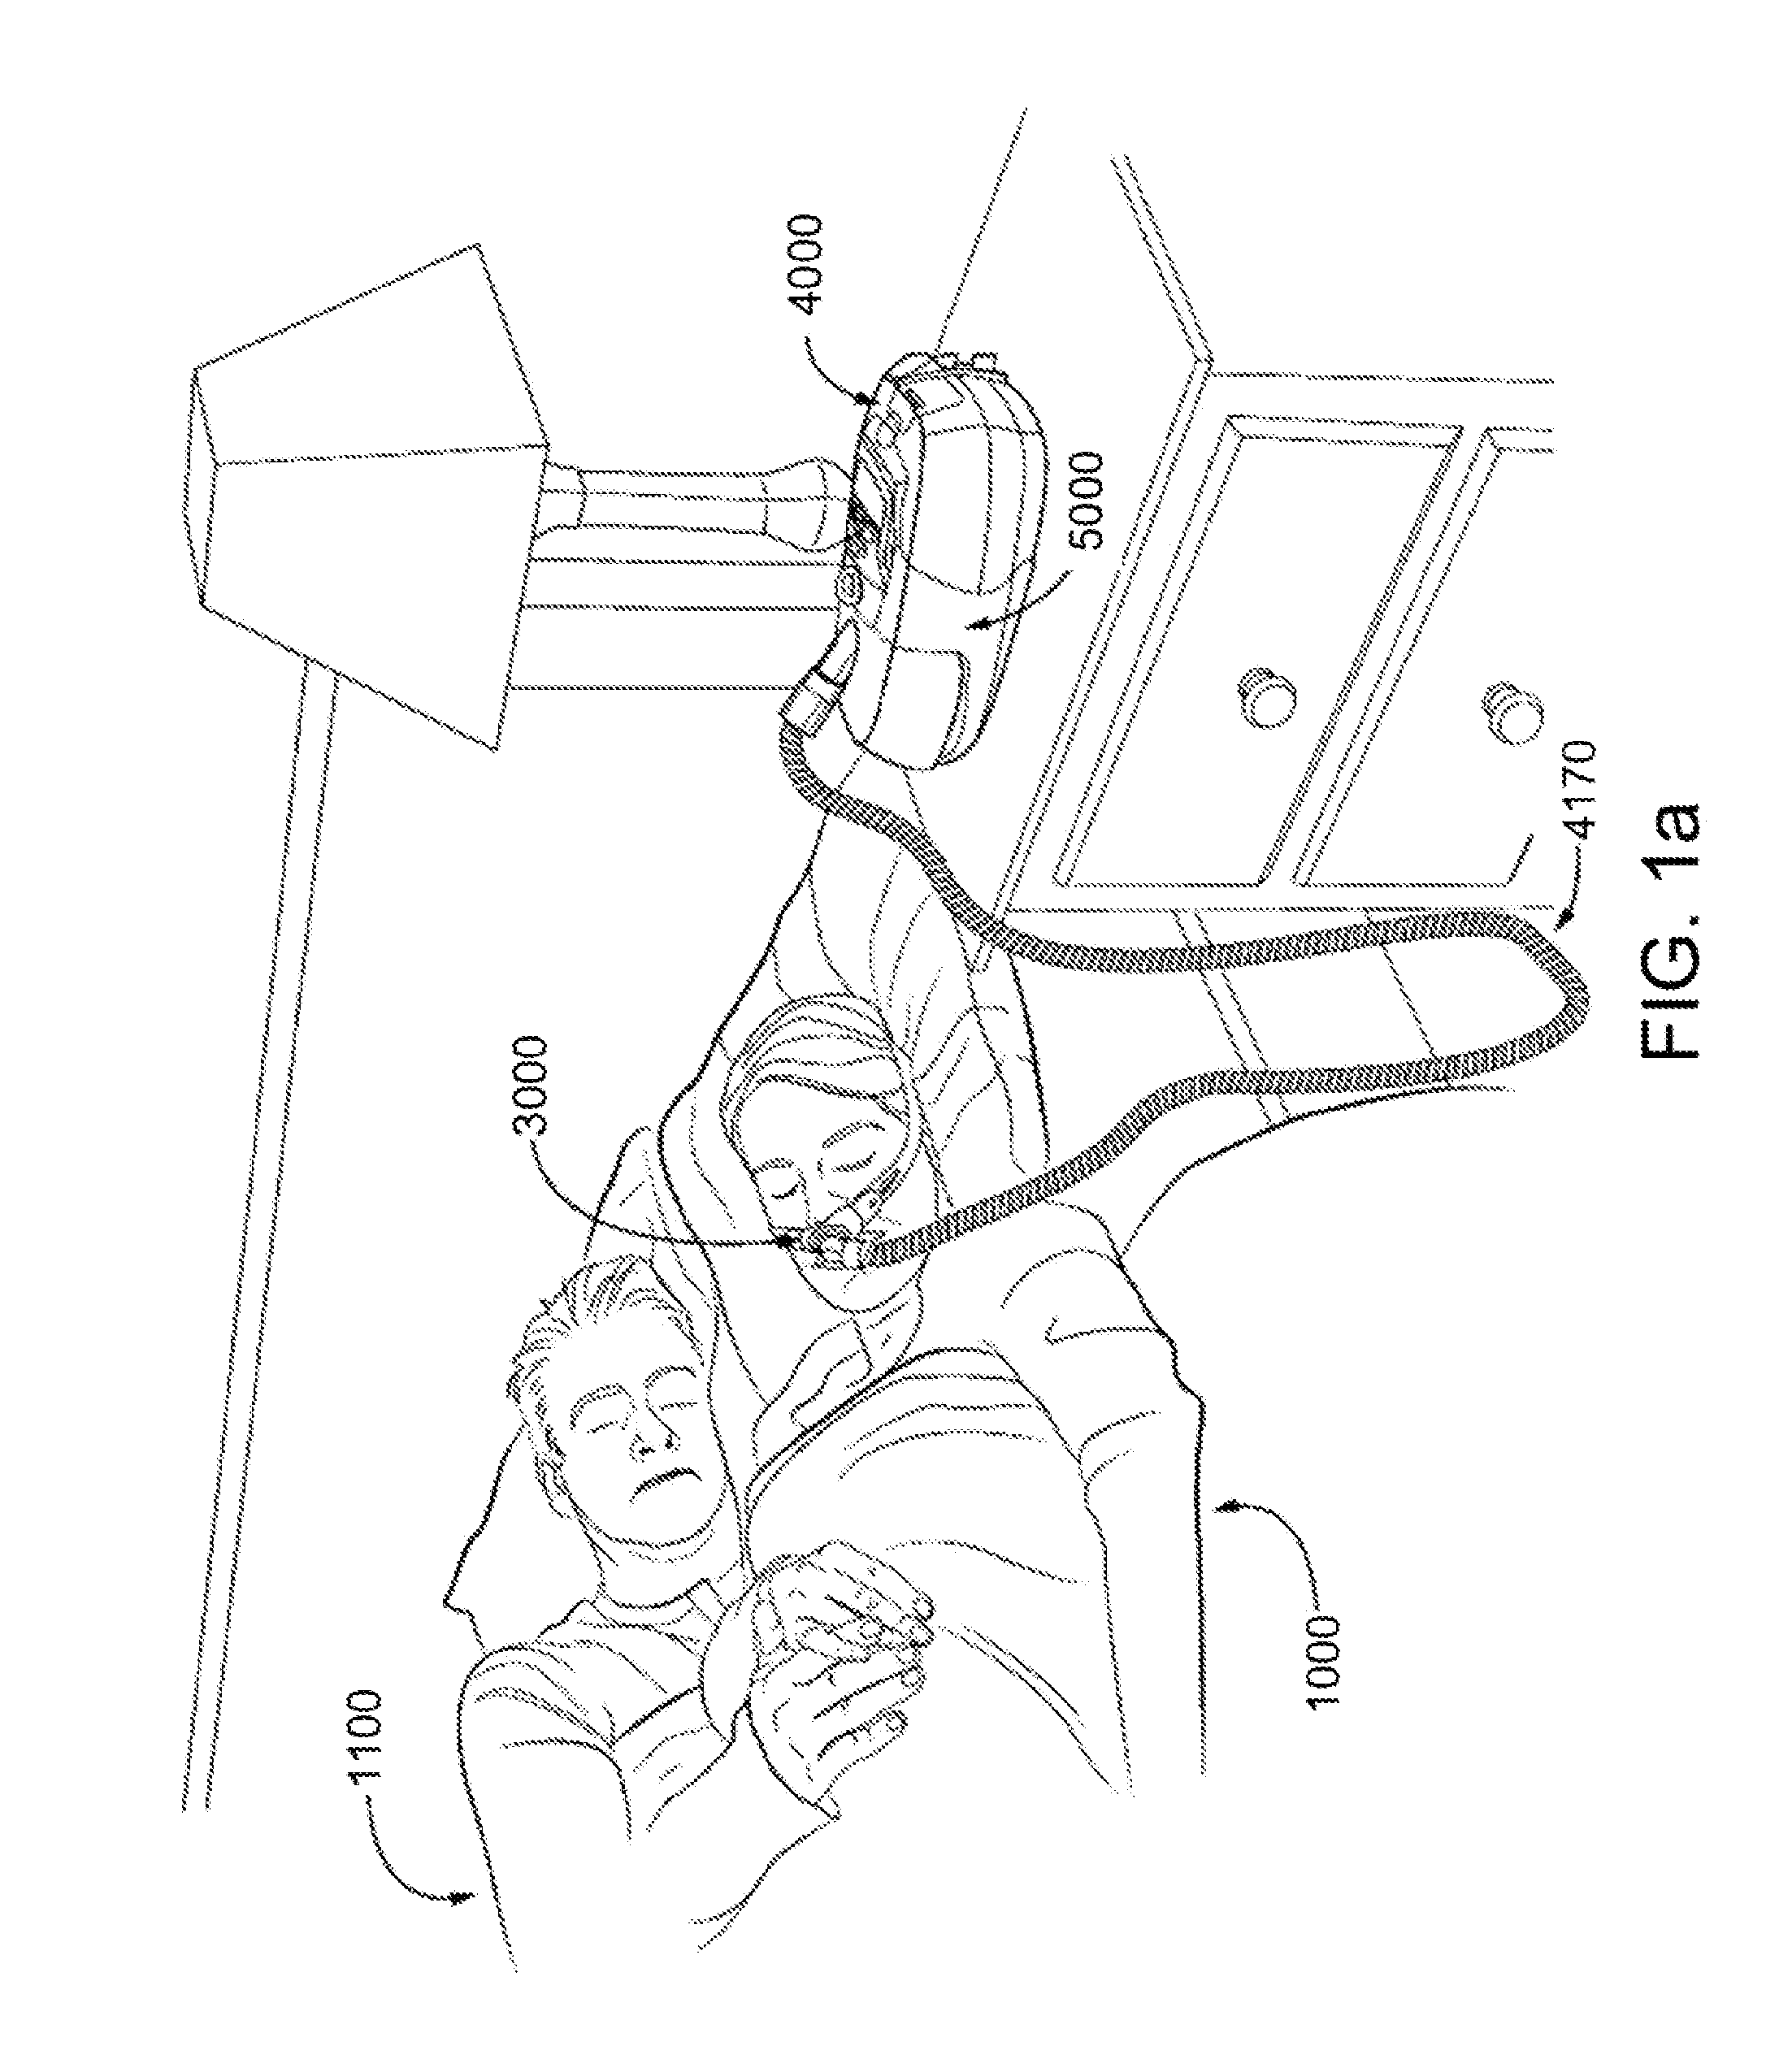 Motor drive system for respiratory apparatus